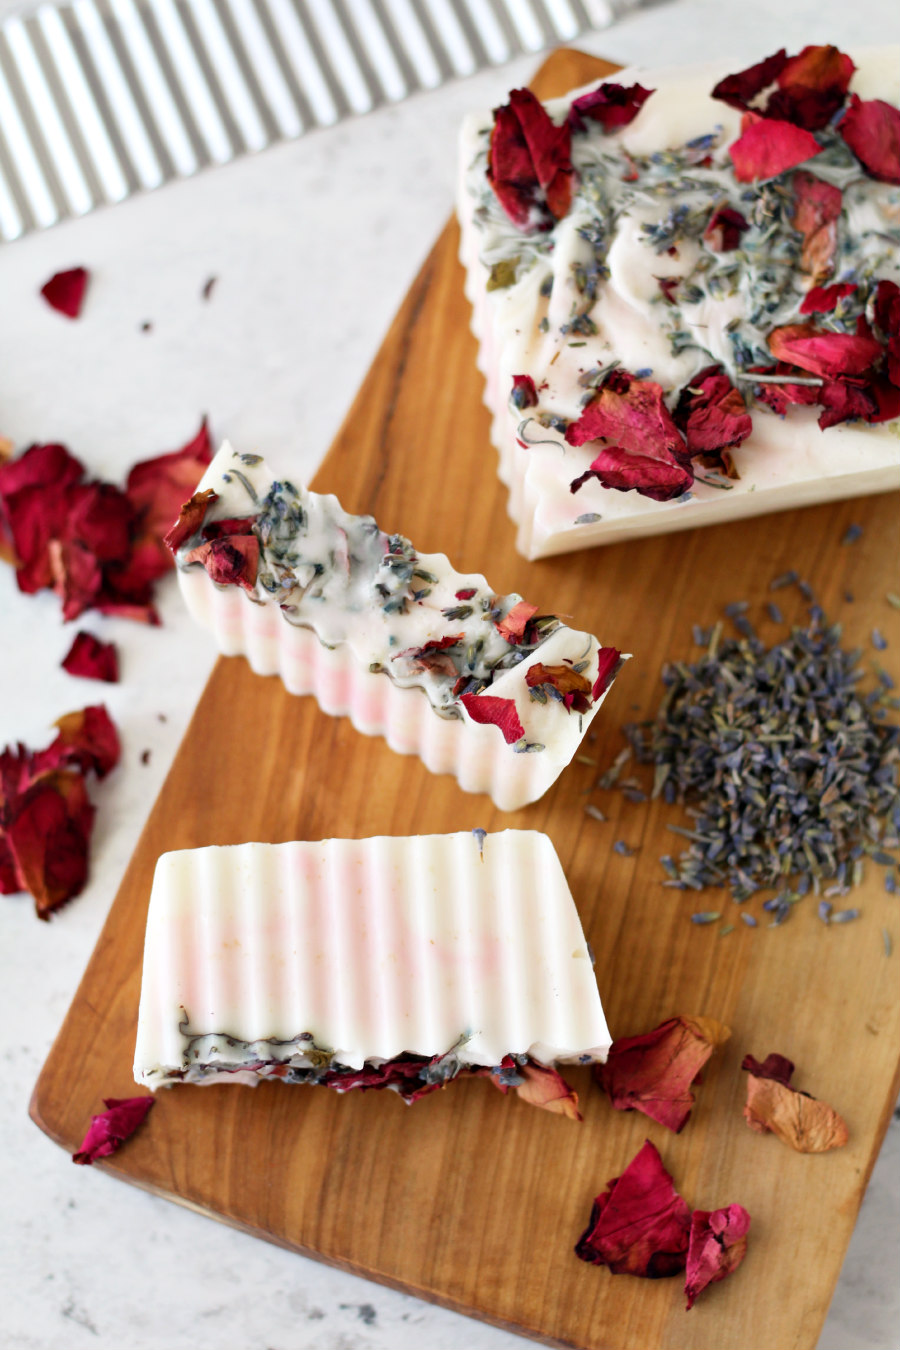 Rose Petal and Lavender Soothing Calming Floral Oatmeal Soap Bar from Holoka Home on Etsy. Soap loaf sits on wood board with soap bars, dried lavender, and dried rose petals. Soap cutter sits in background.